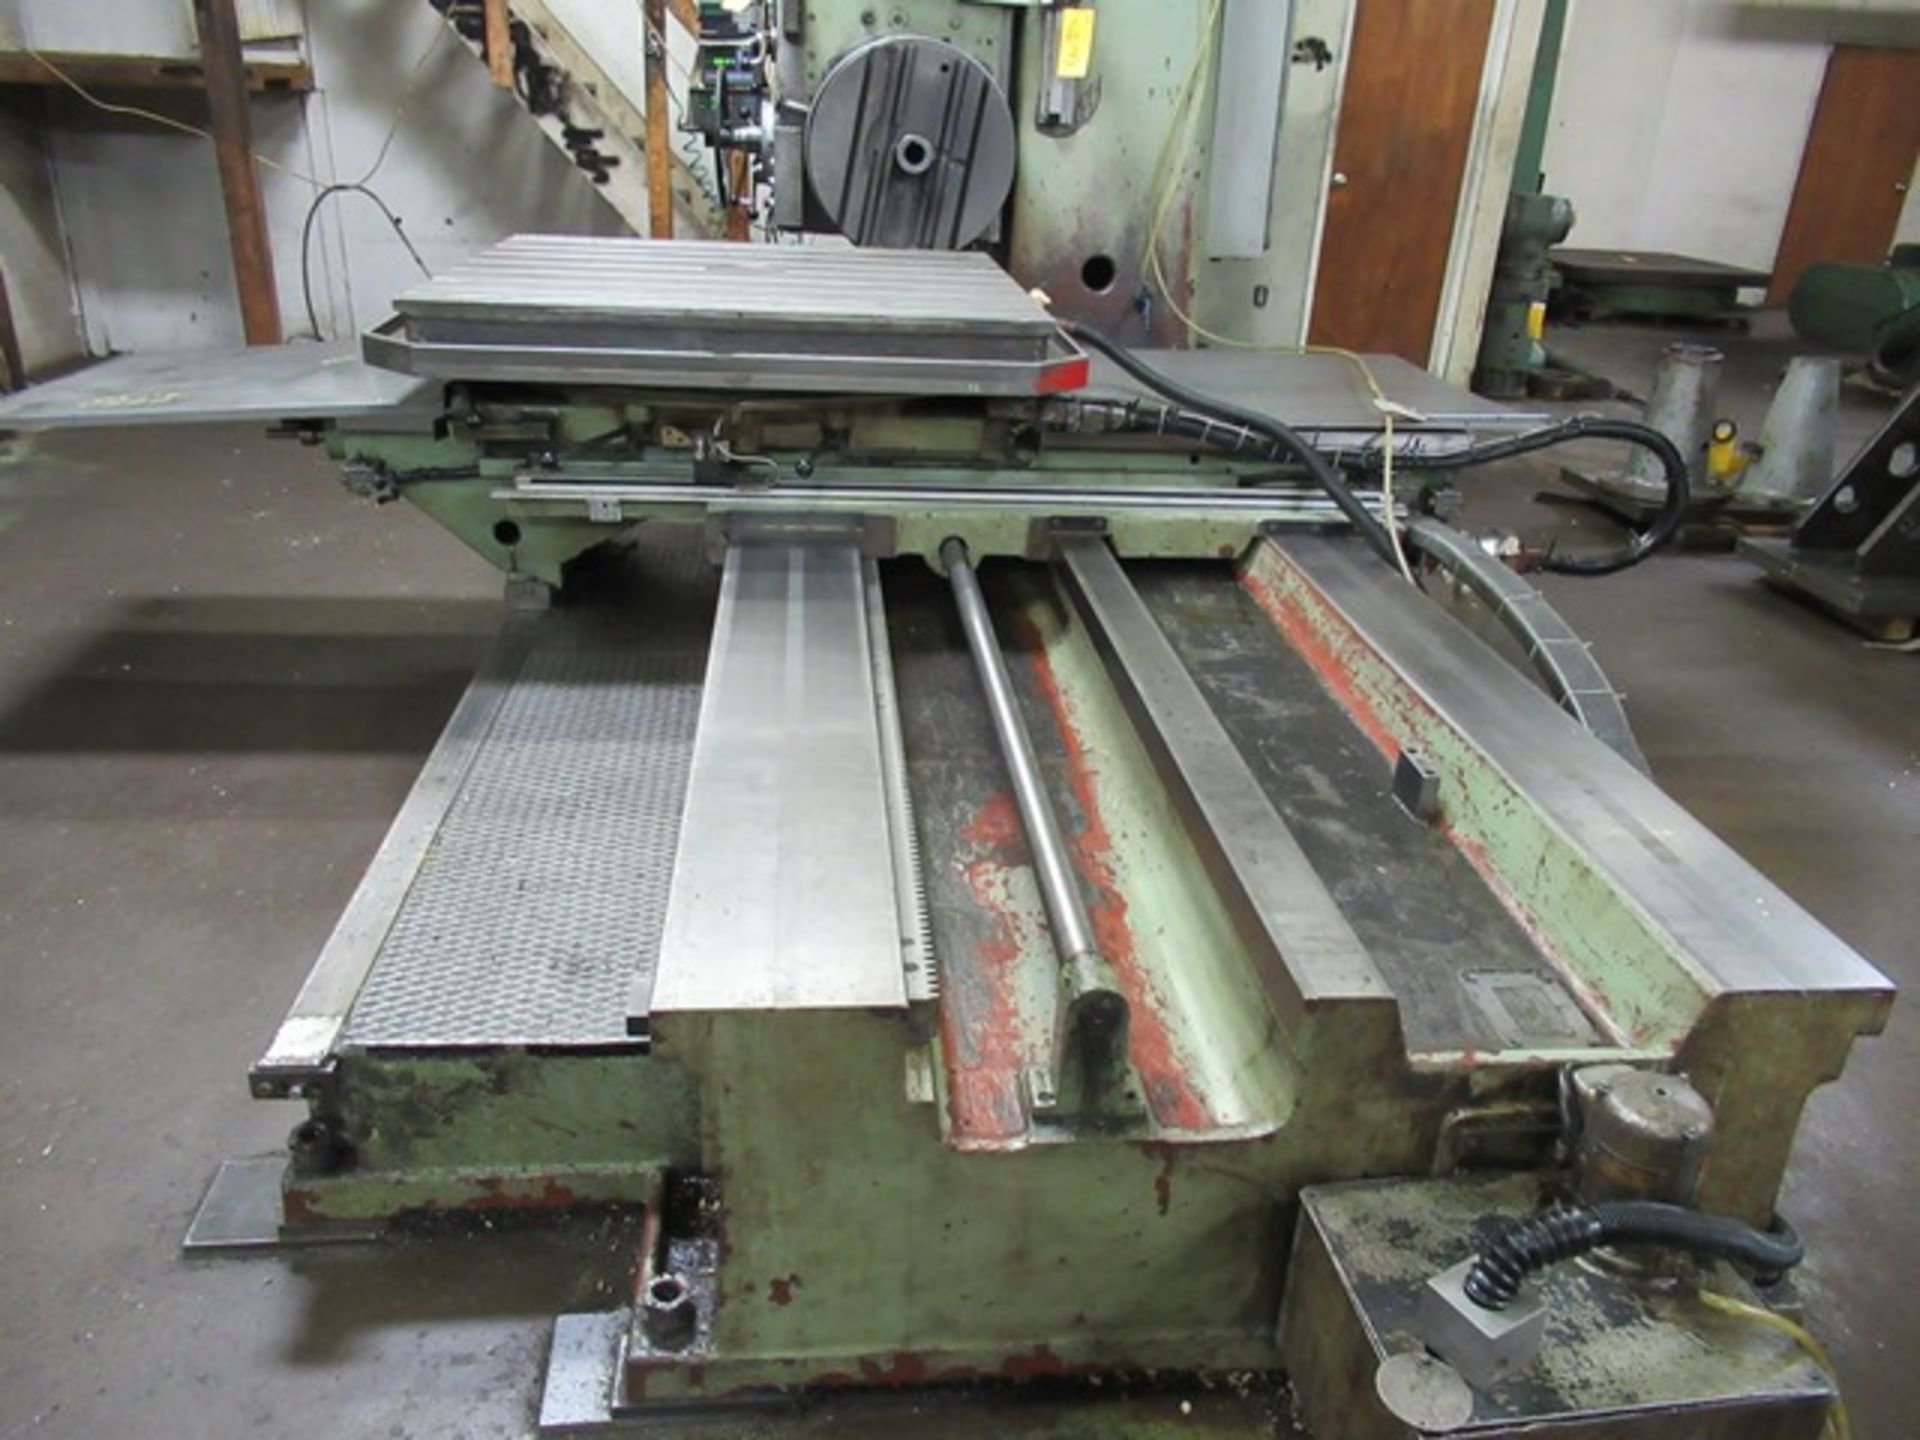 TOS W100A 49"X49" POWER ROTARY TABLE, TRAVELS X-63", Y-44", Z-49" HORIZONTAL BORING MILL - Image 3 of 3